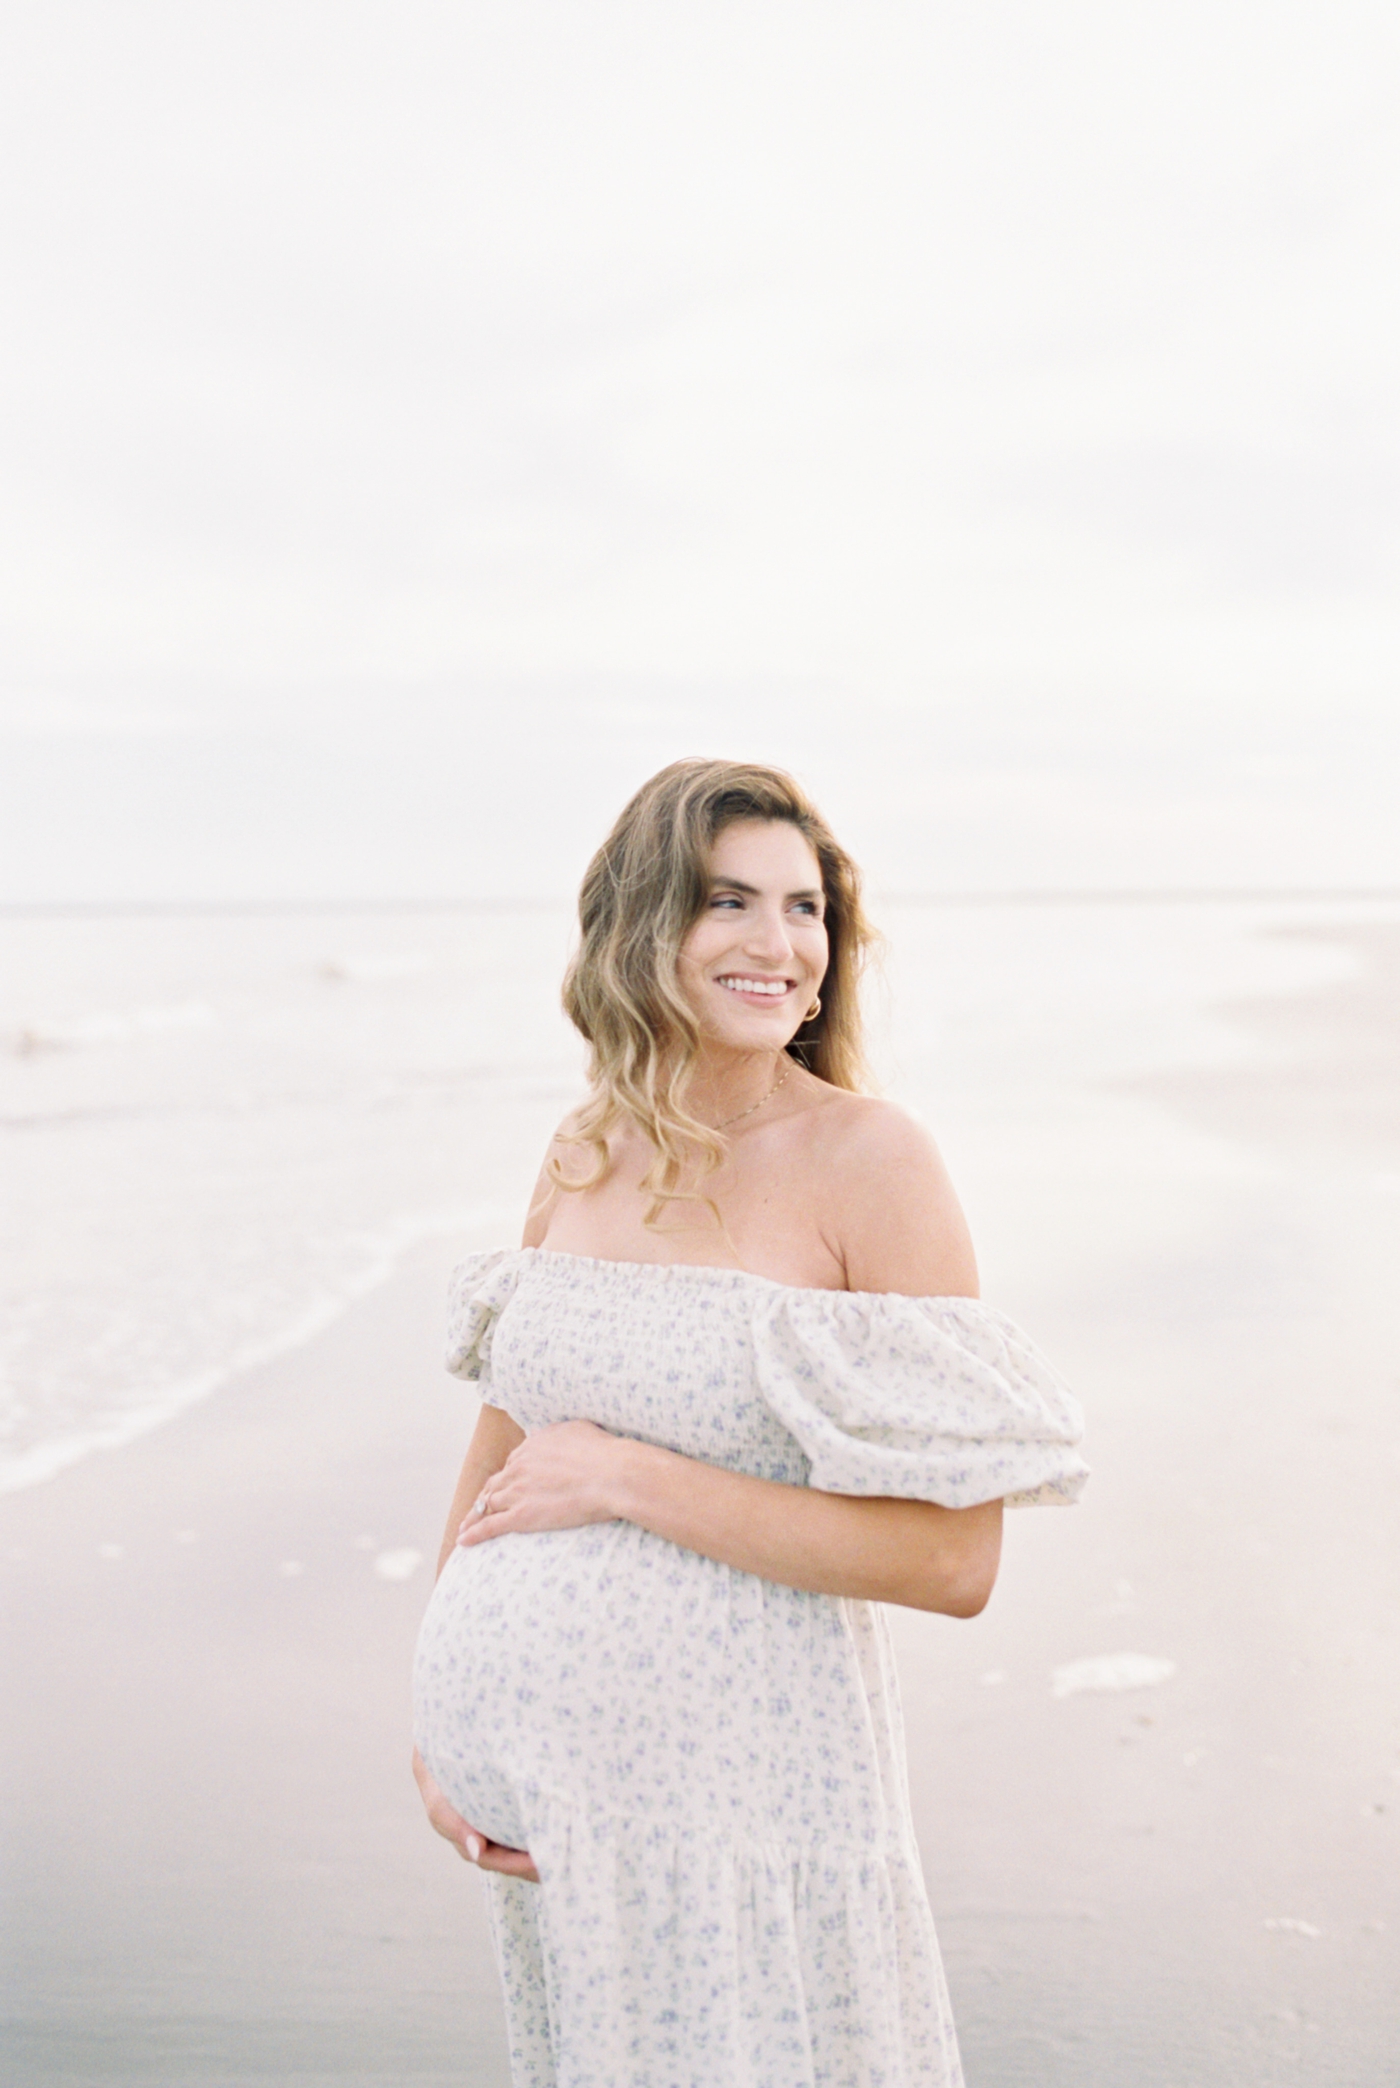 Mom to be in white dress with blue florals on the beach | Photo by Caitlyn Motycka Photography.